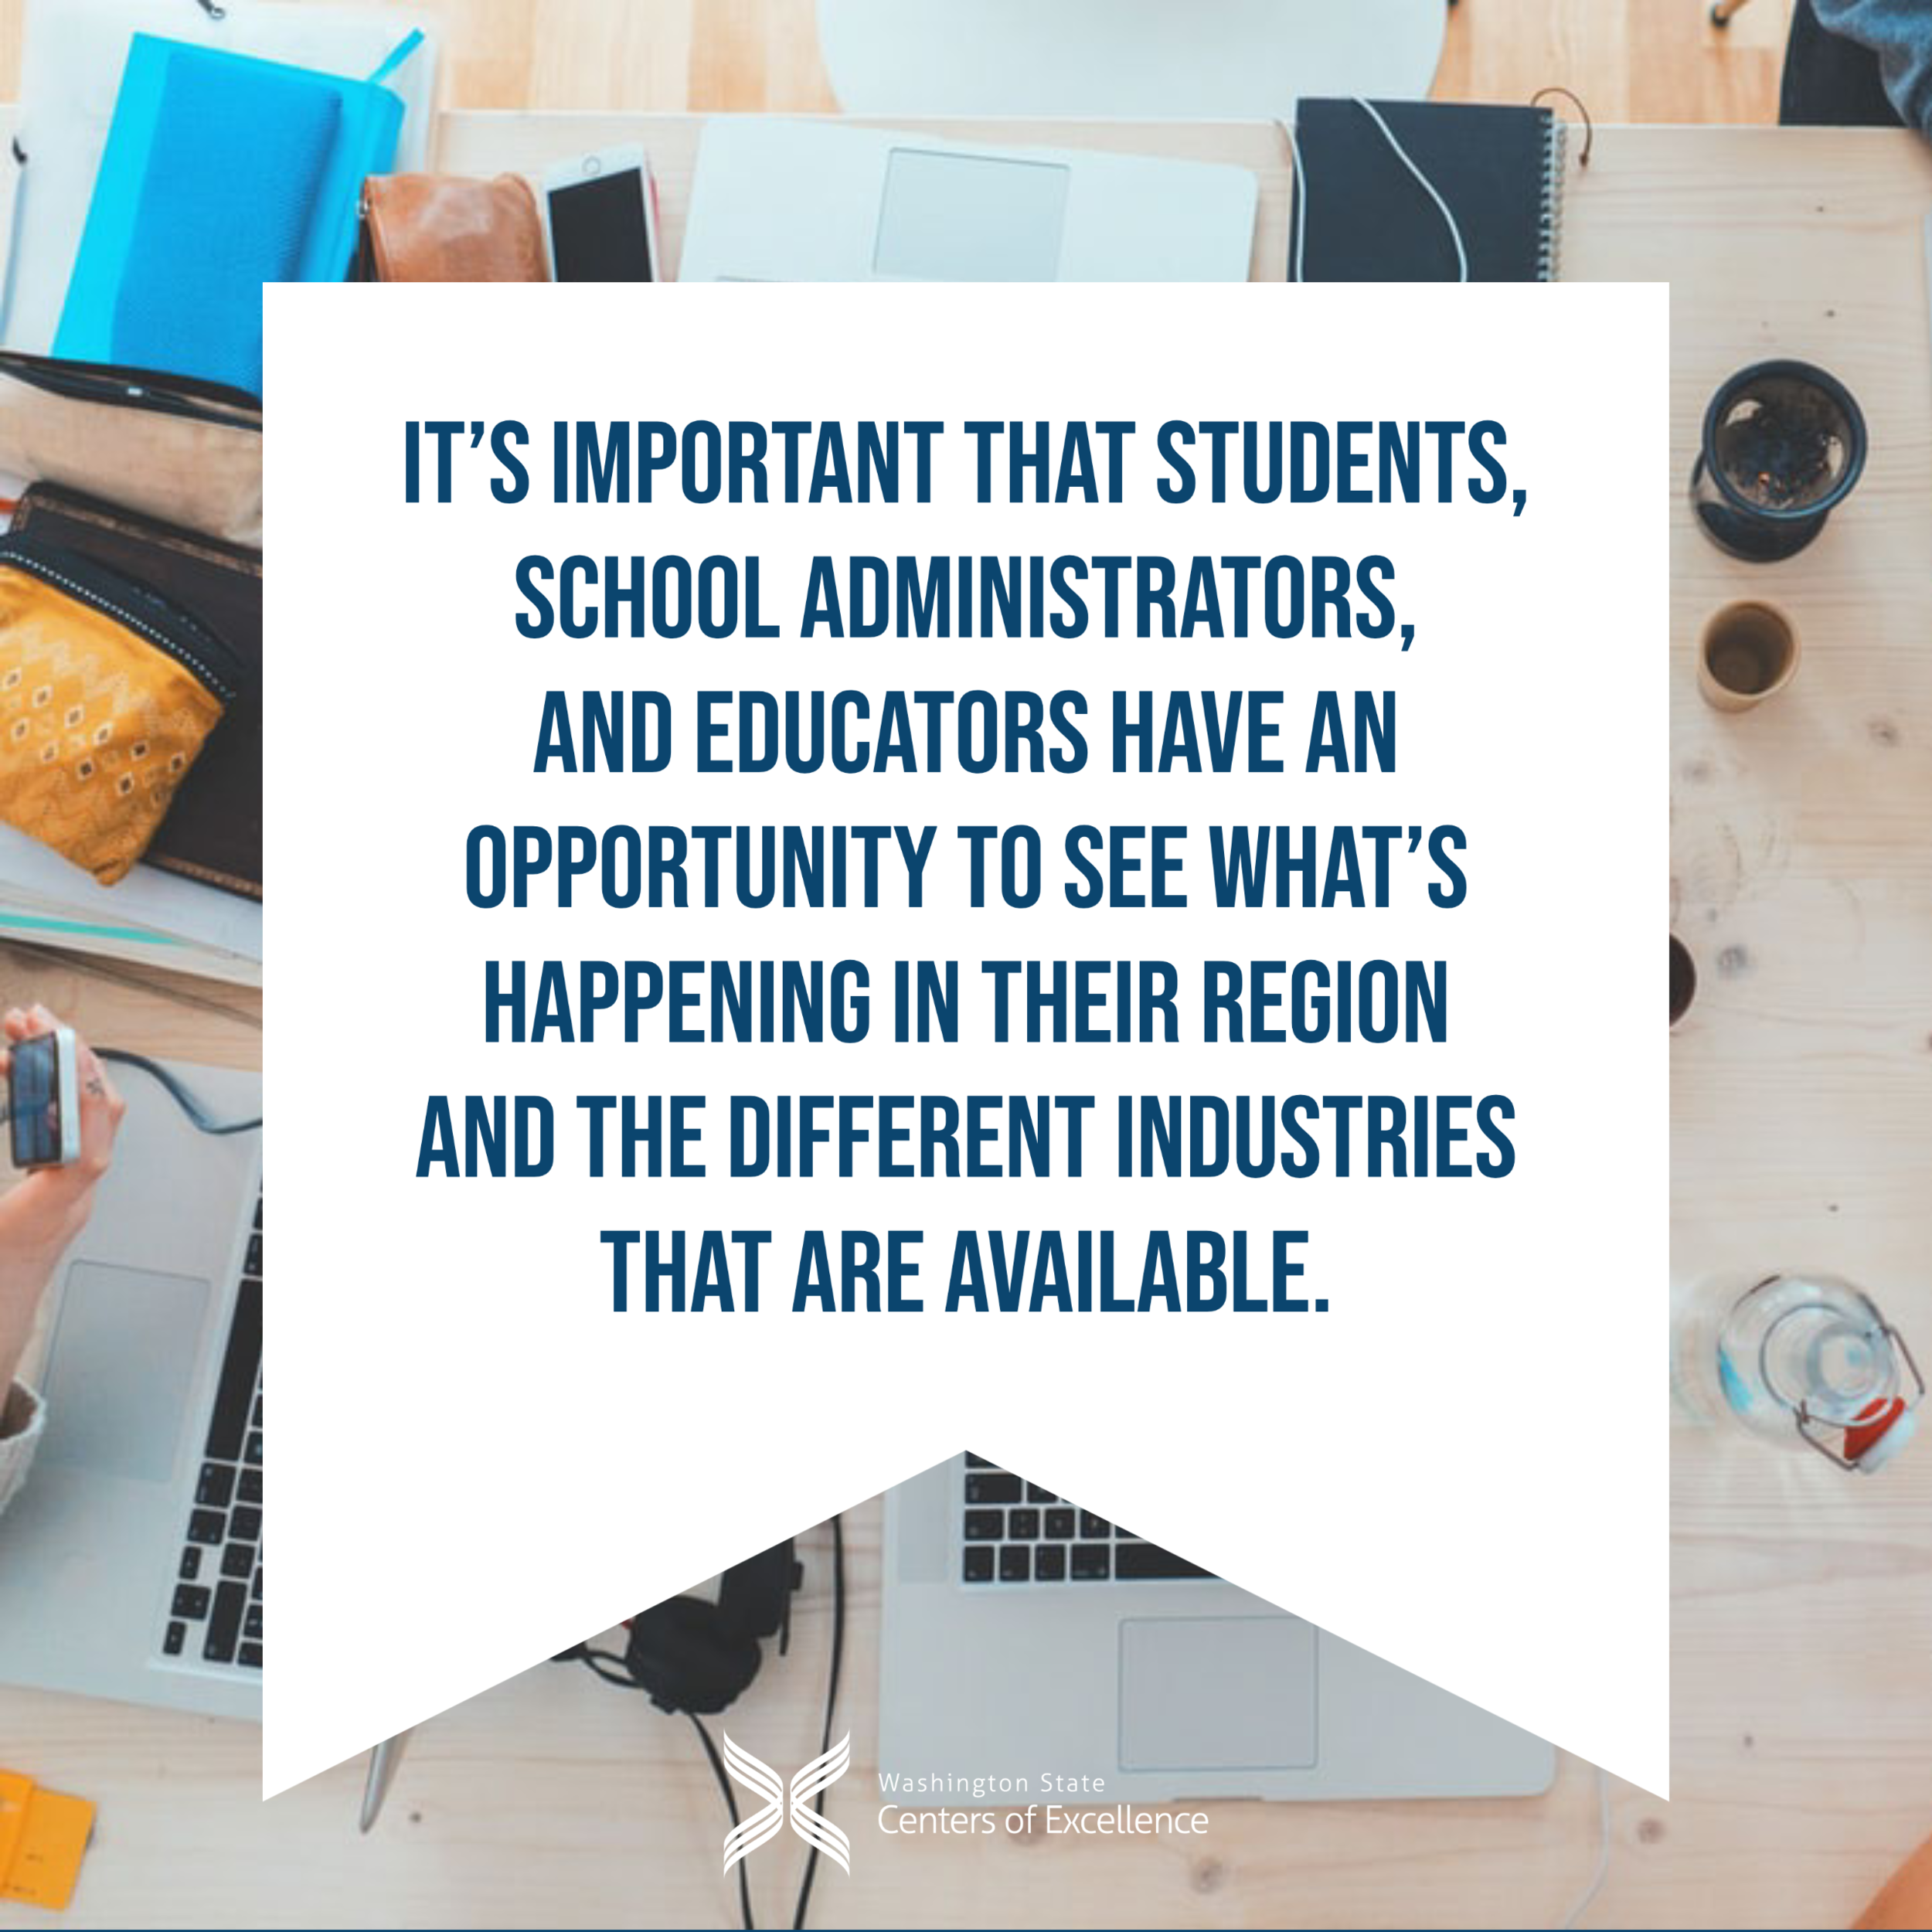 It’s important that students, school administrators, and educators have an opportunity to see what’s happening in their region and the different industries that are available.